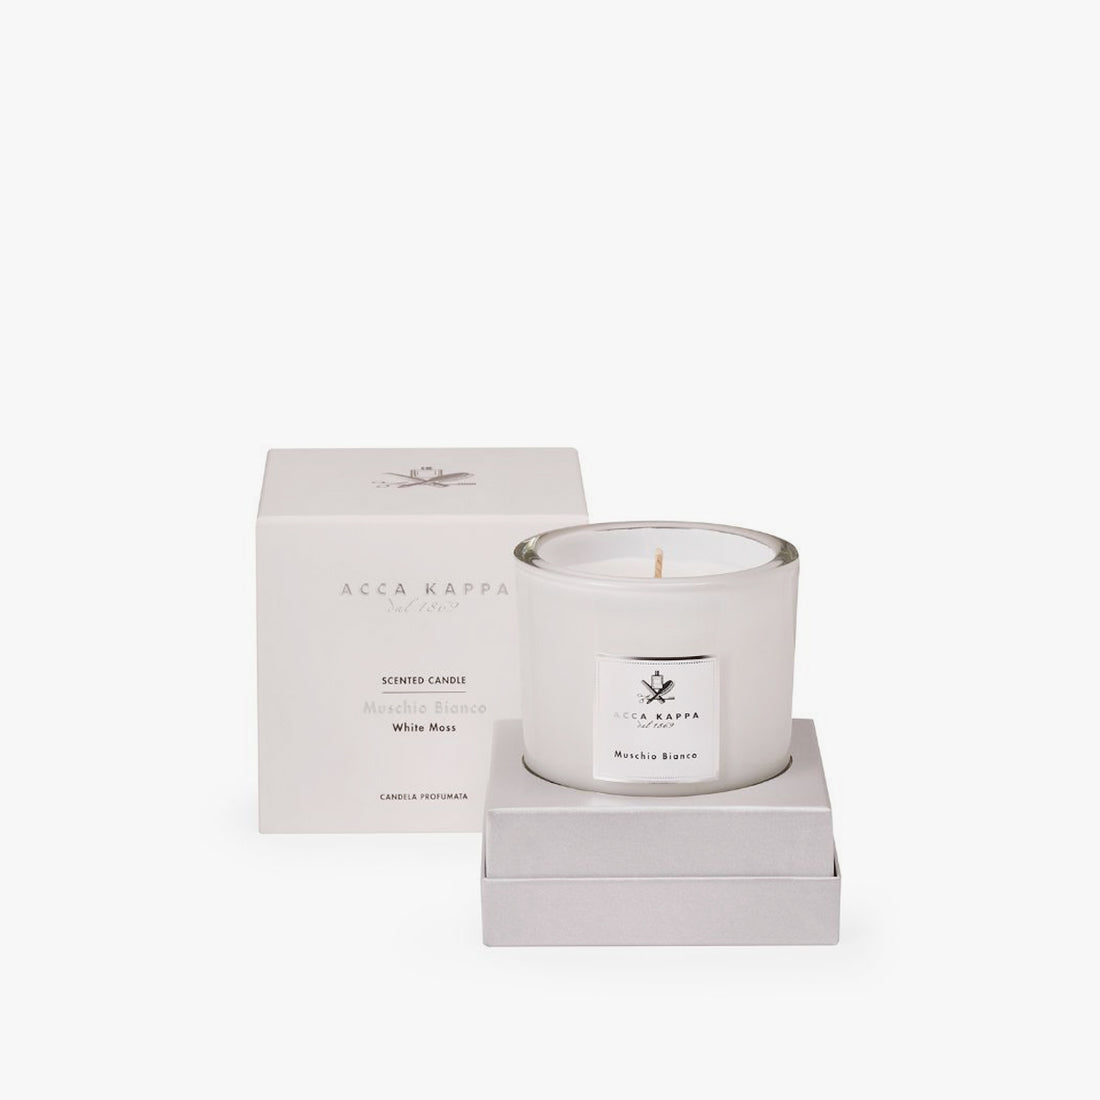 ACCA KAPPA White Moss Scented Candle